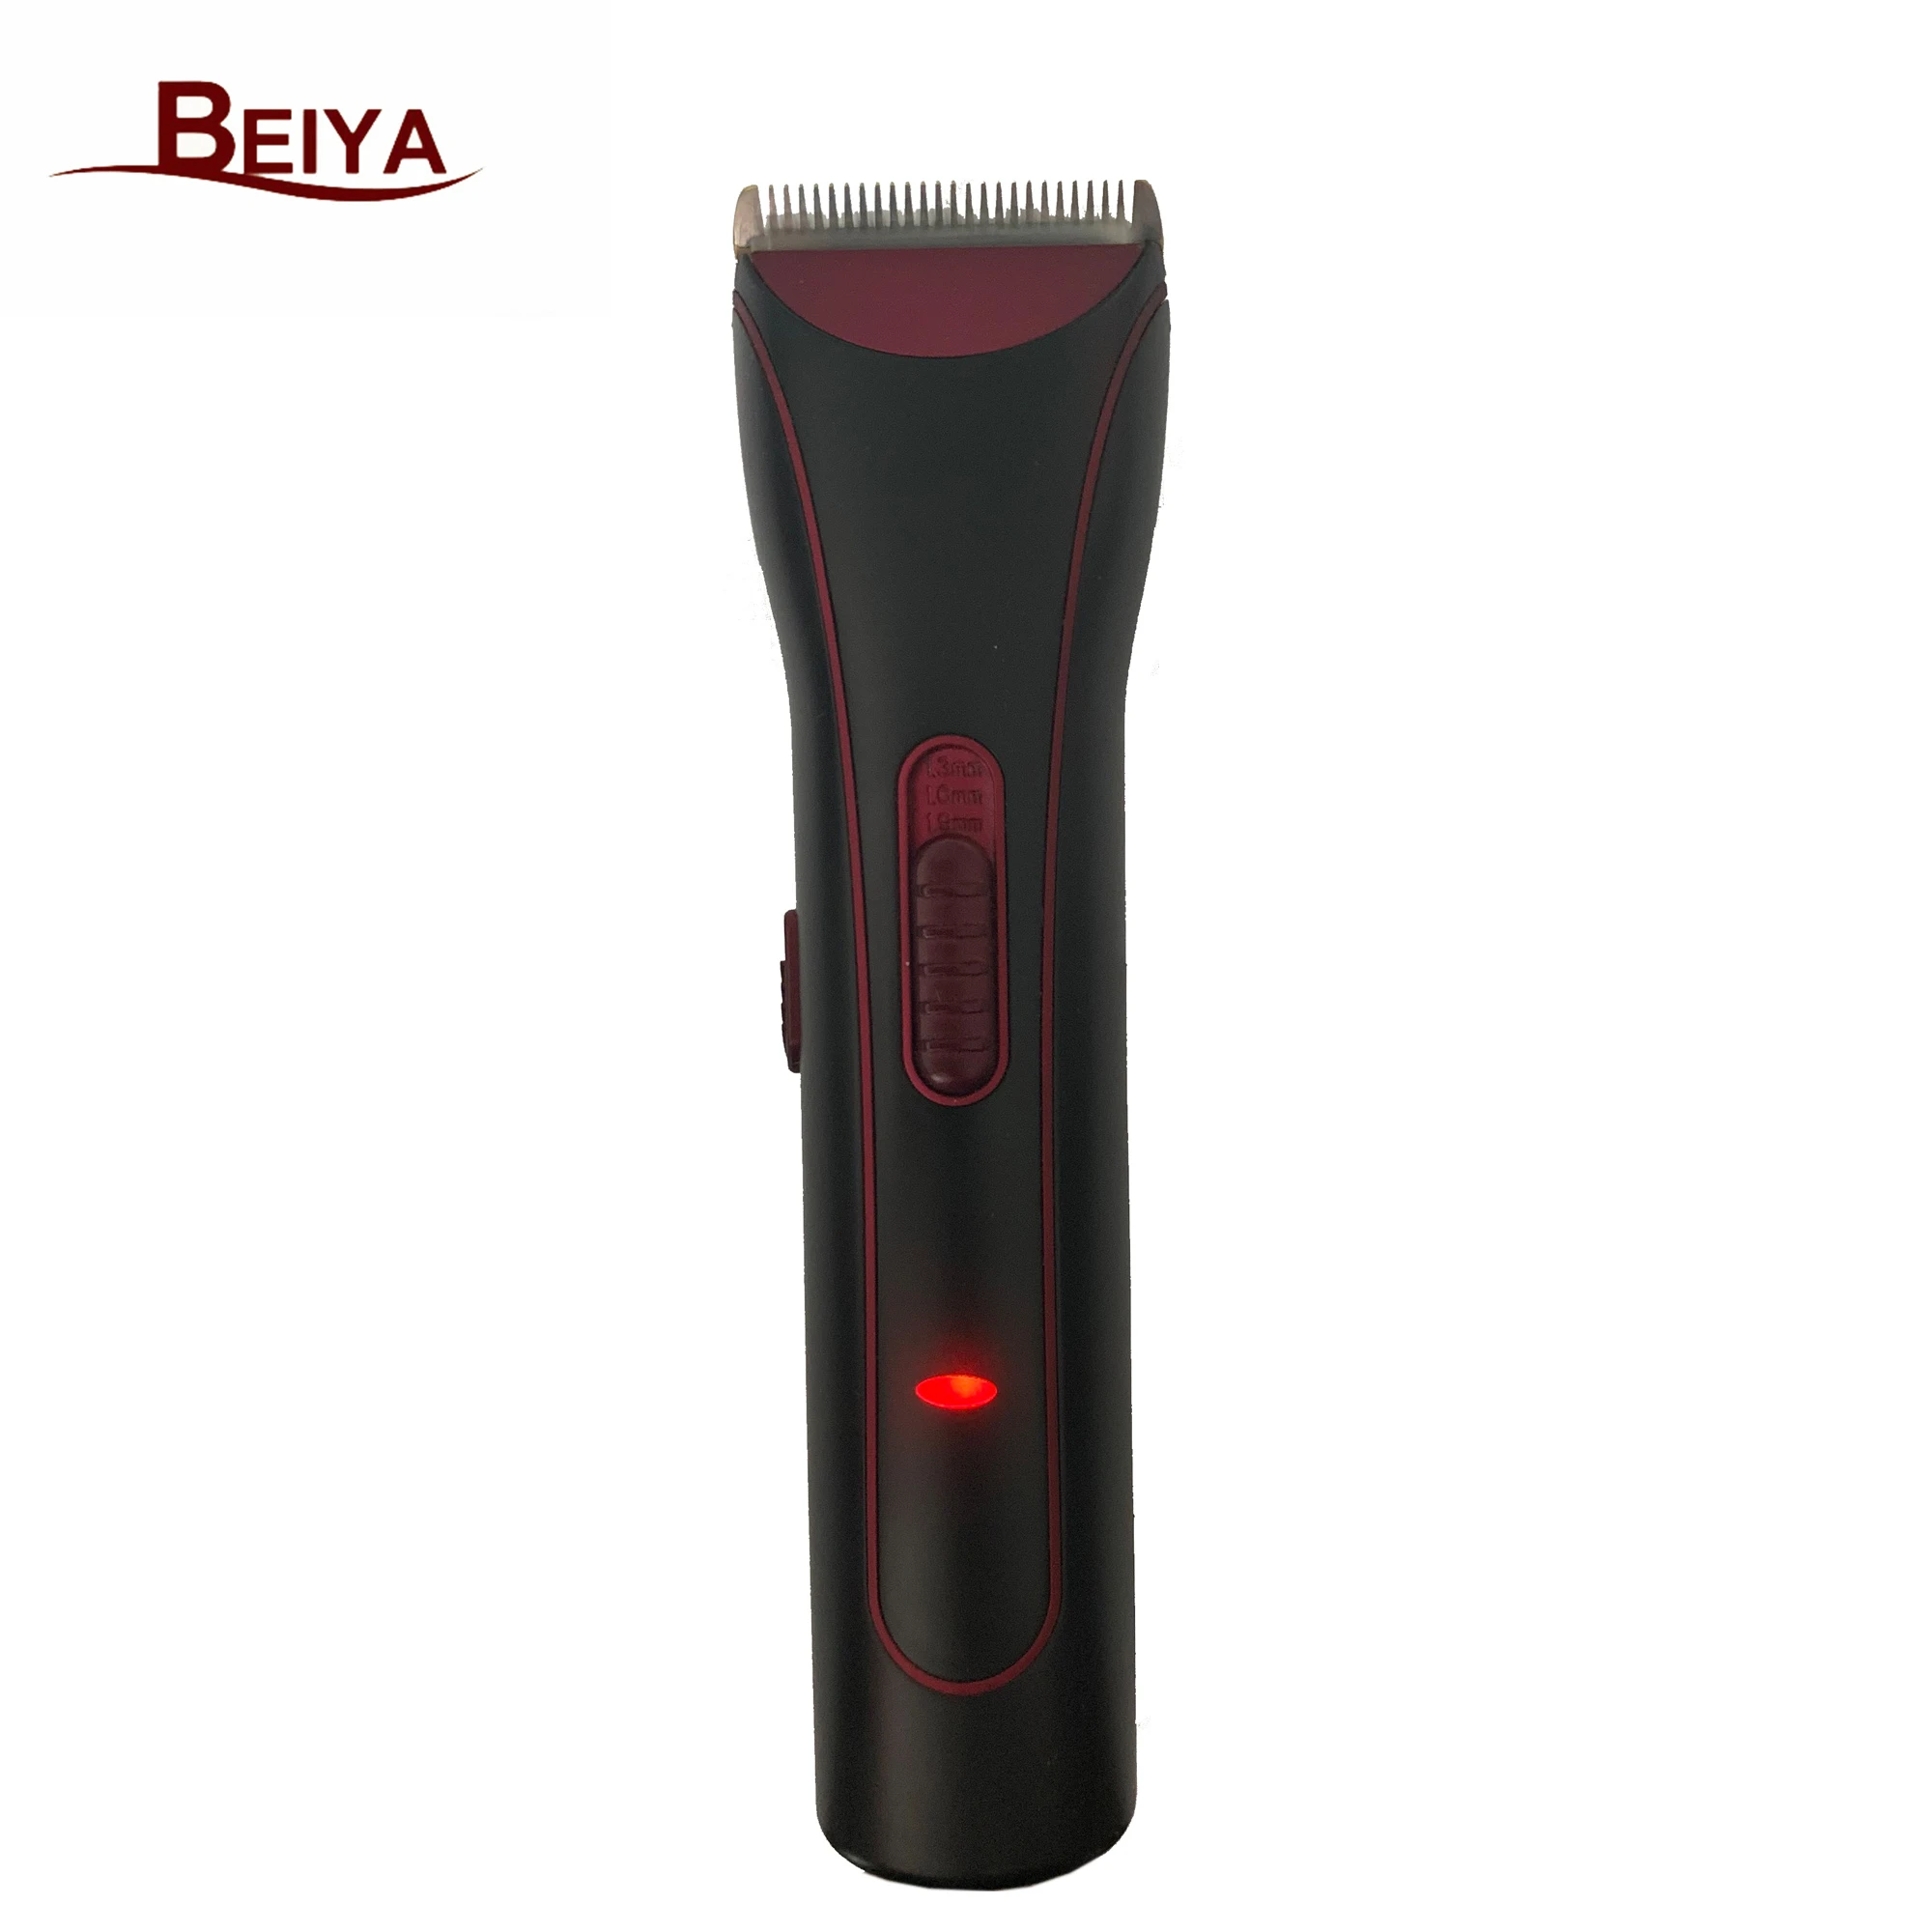 GS Yuyao Beiya Professional hair clipper rechargeable DC electric hair clipper